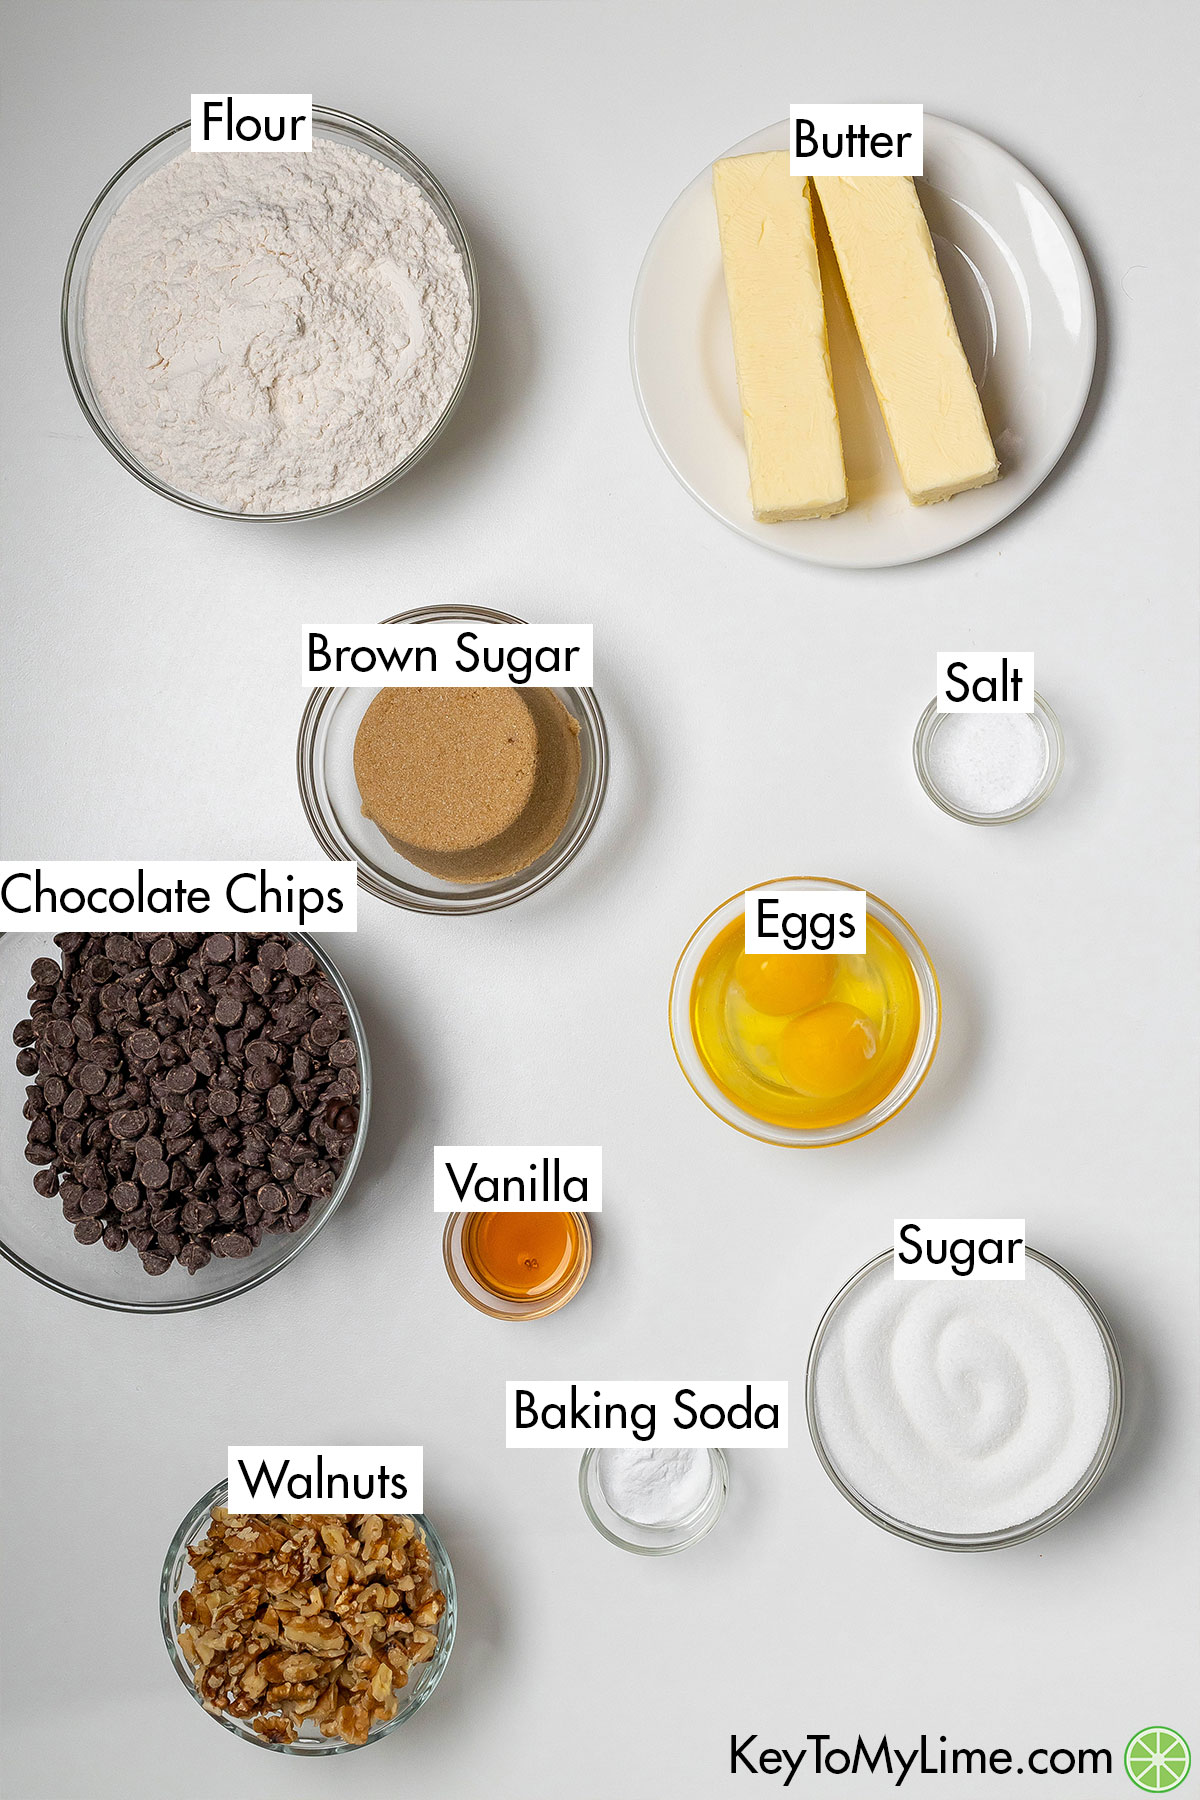 The labeled ingredients for Toll House cookie bars.